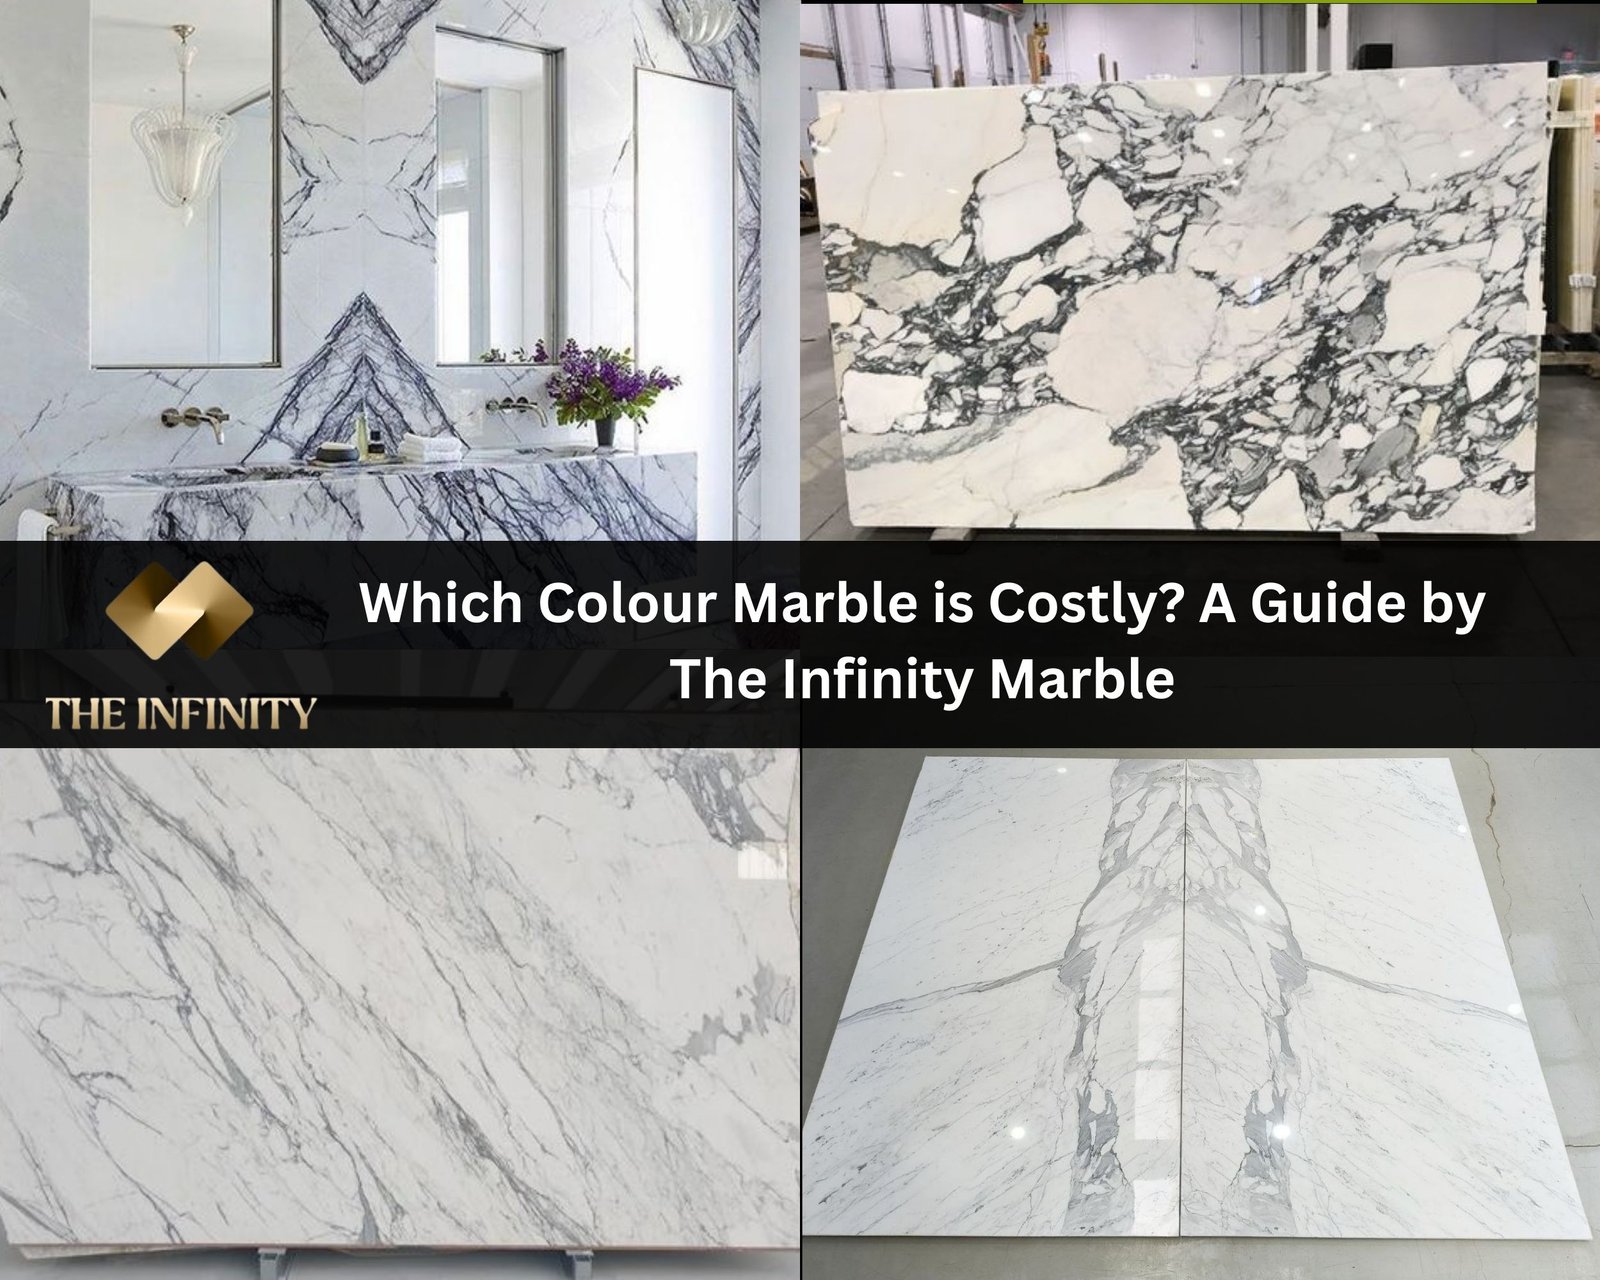 Which Colour Marble is Costly? A Guide by The Infinity Marble by Bhandari Marble Group